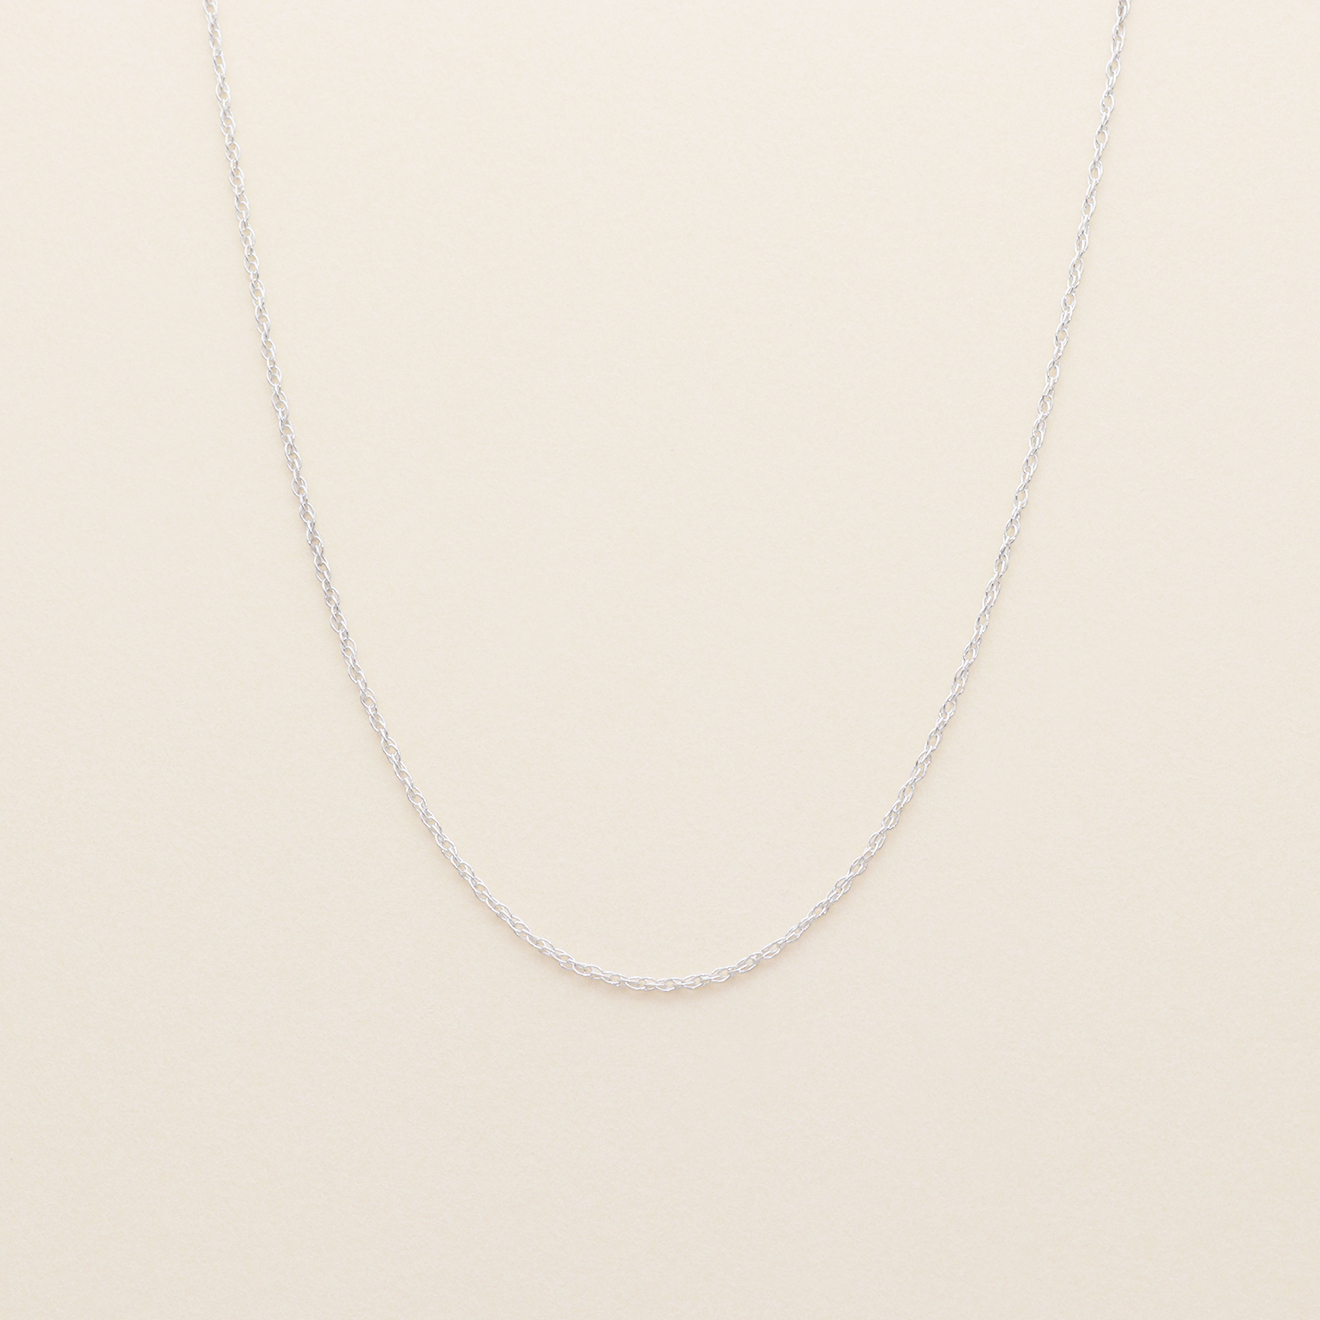 Twirly Silver Chain Necklace